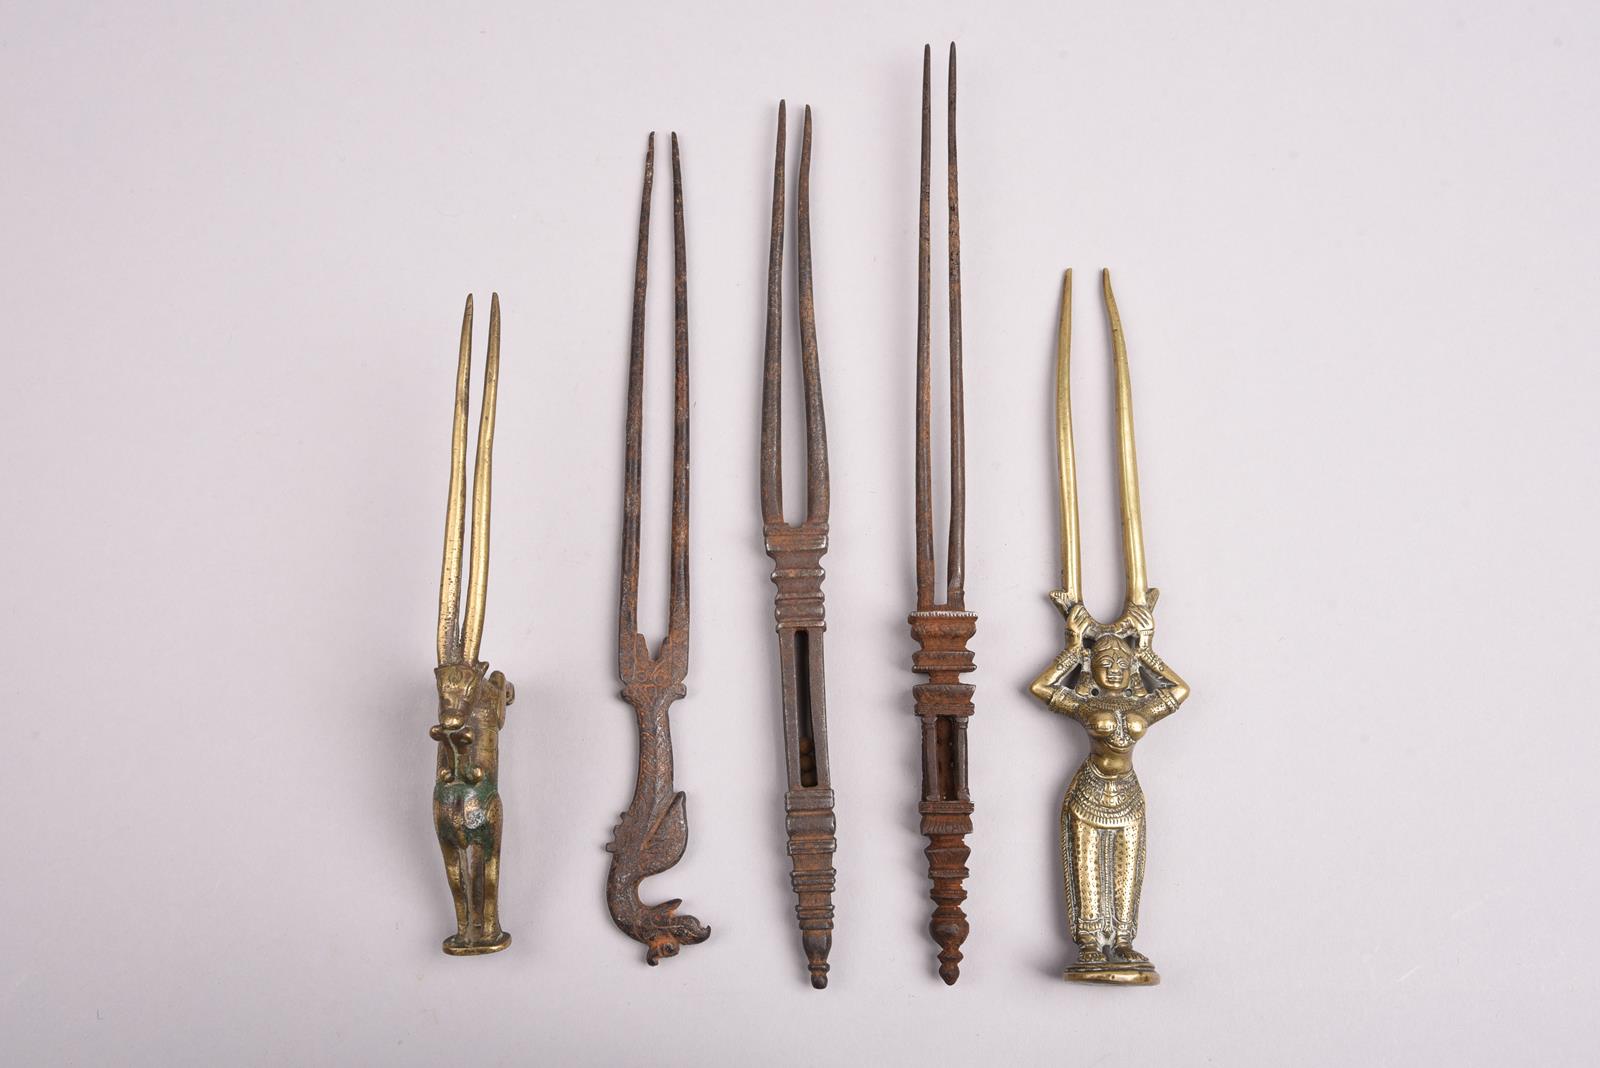 Five Indian hairpins brass and steel, all with two prongs, including a standing female figure, a - Image 2 of 4